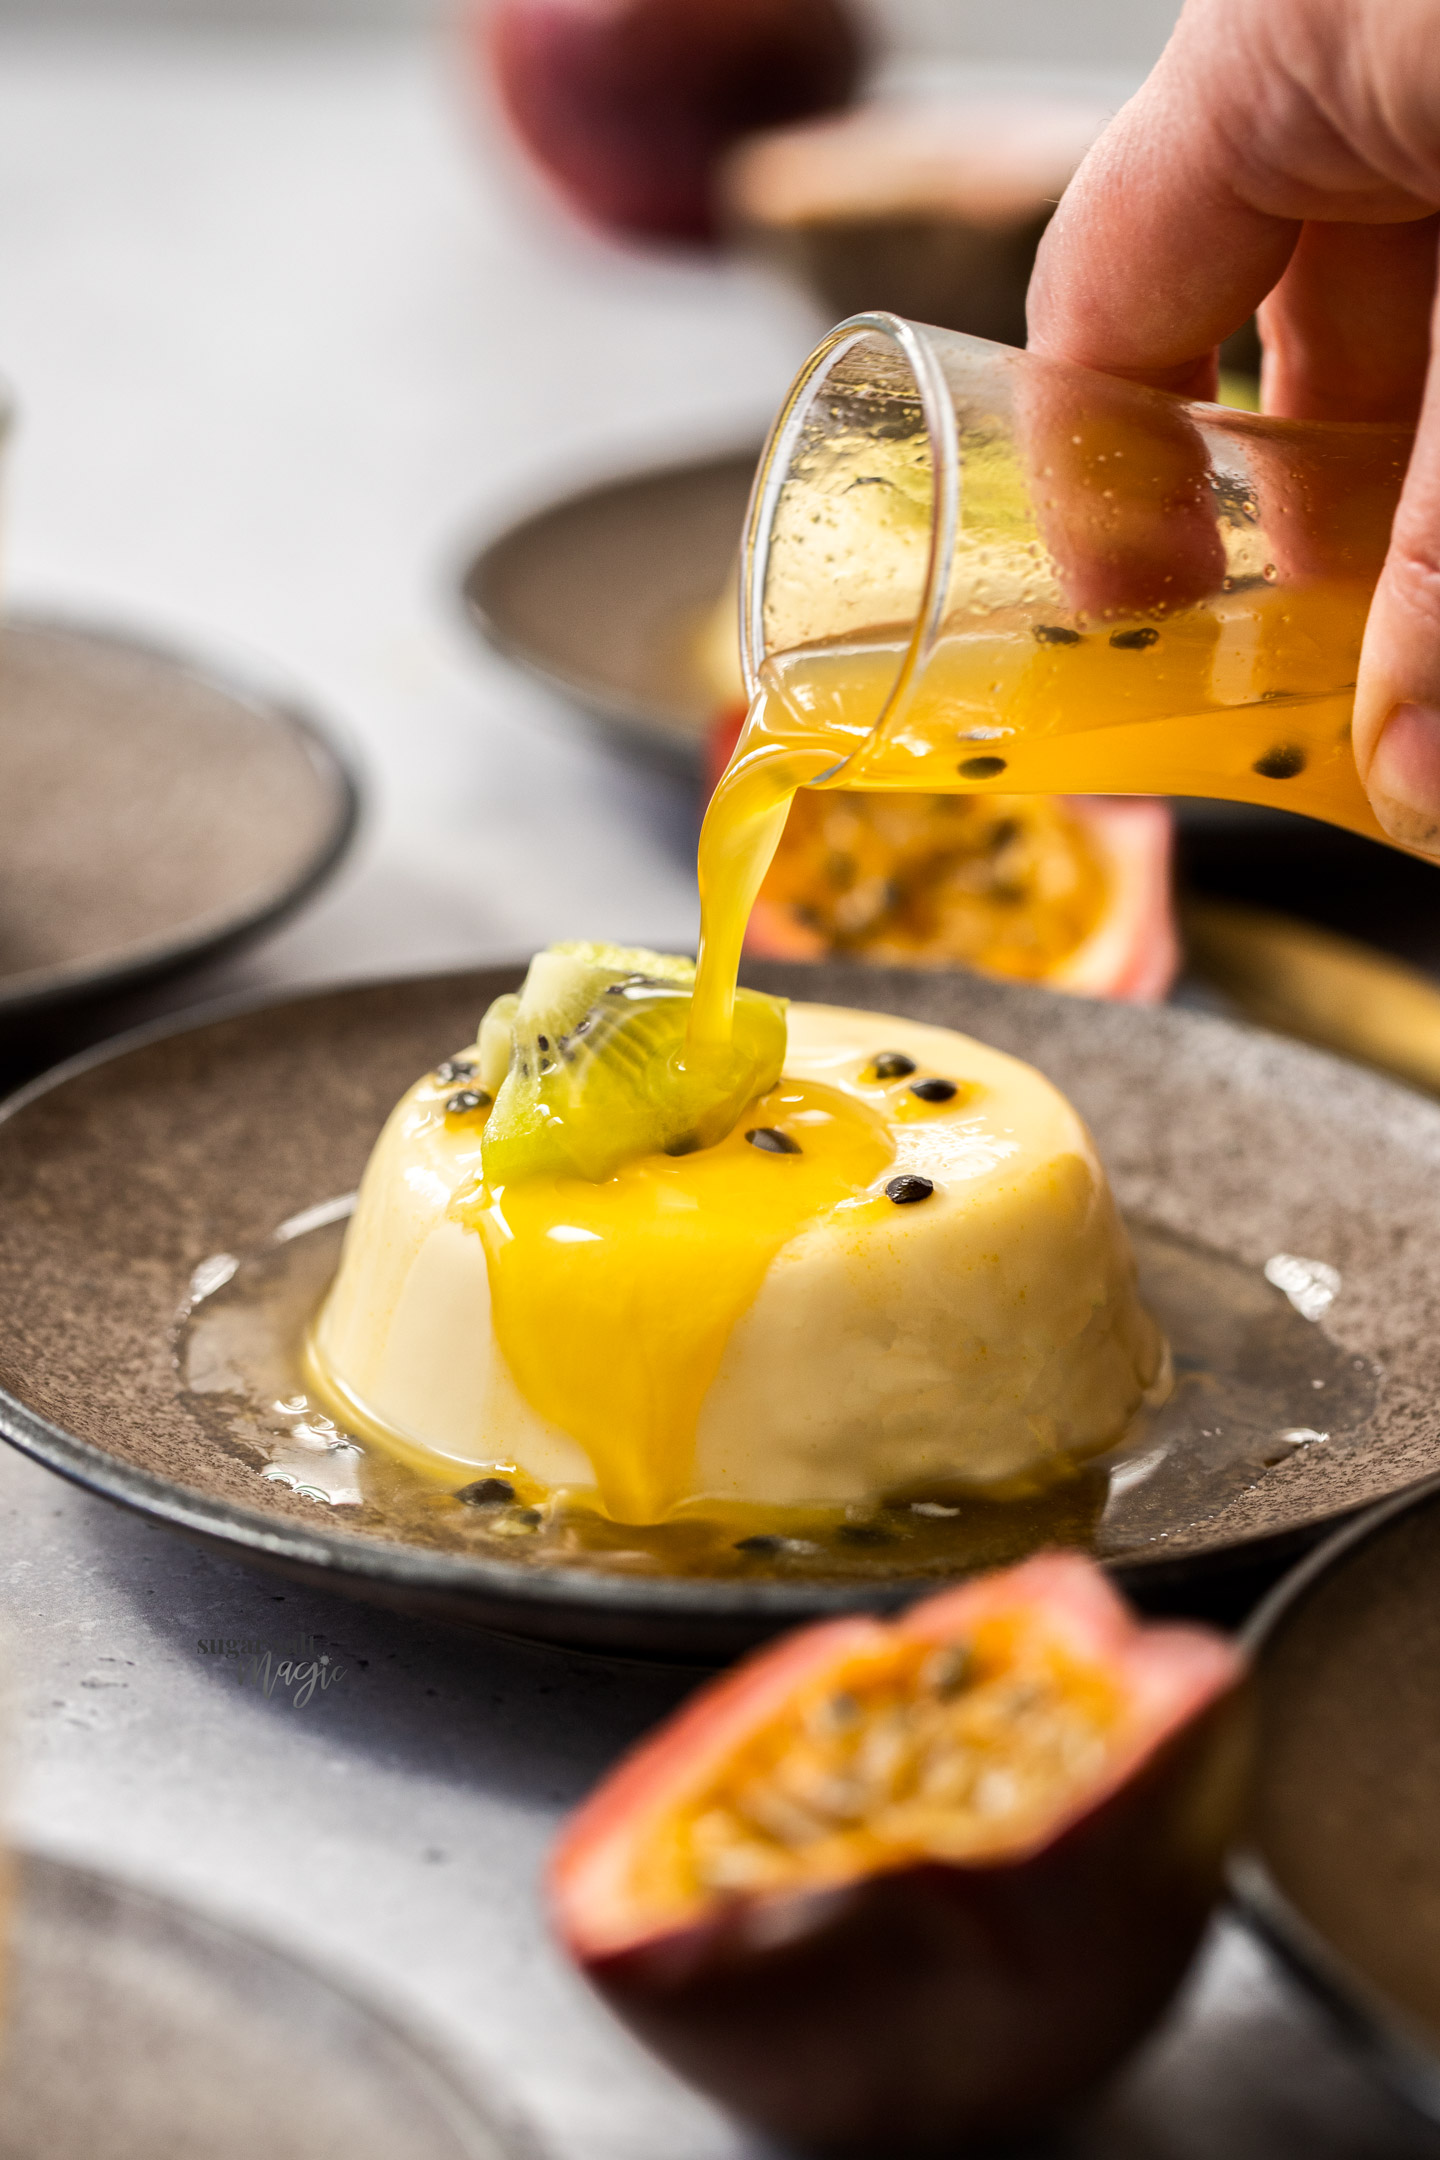 Syrup being poured over panna cotta.